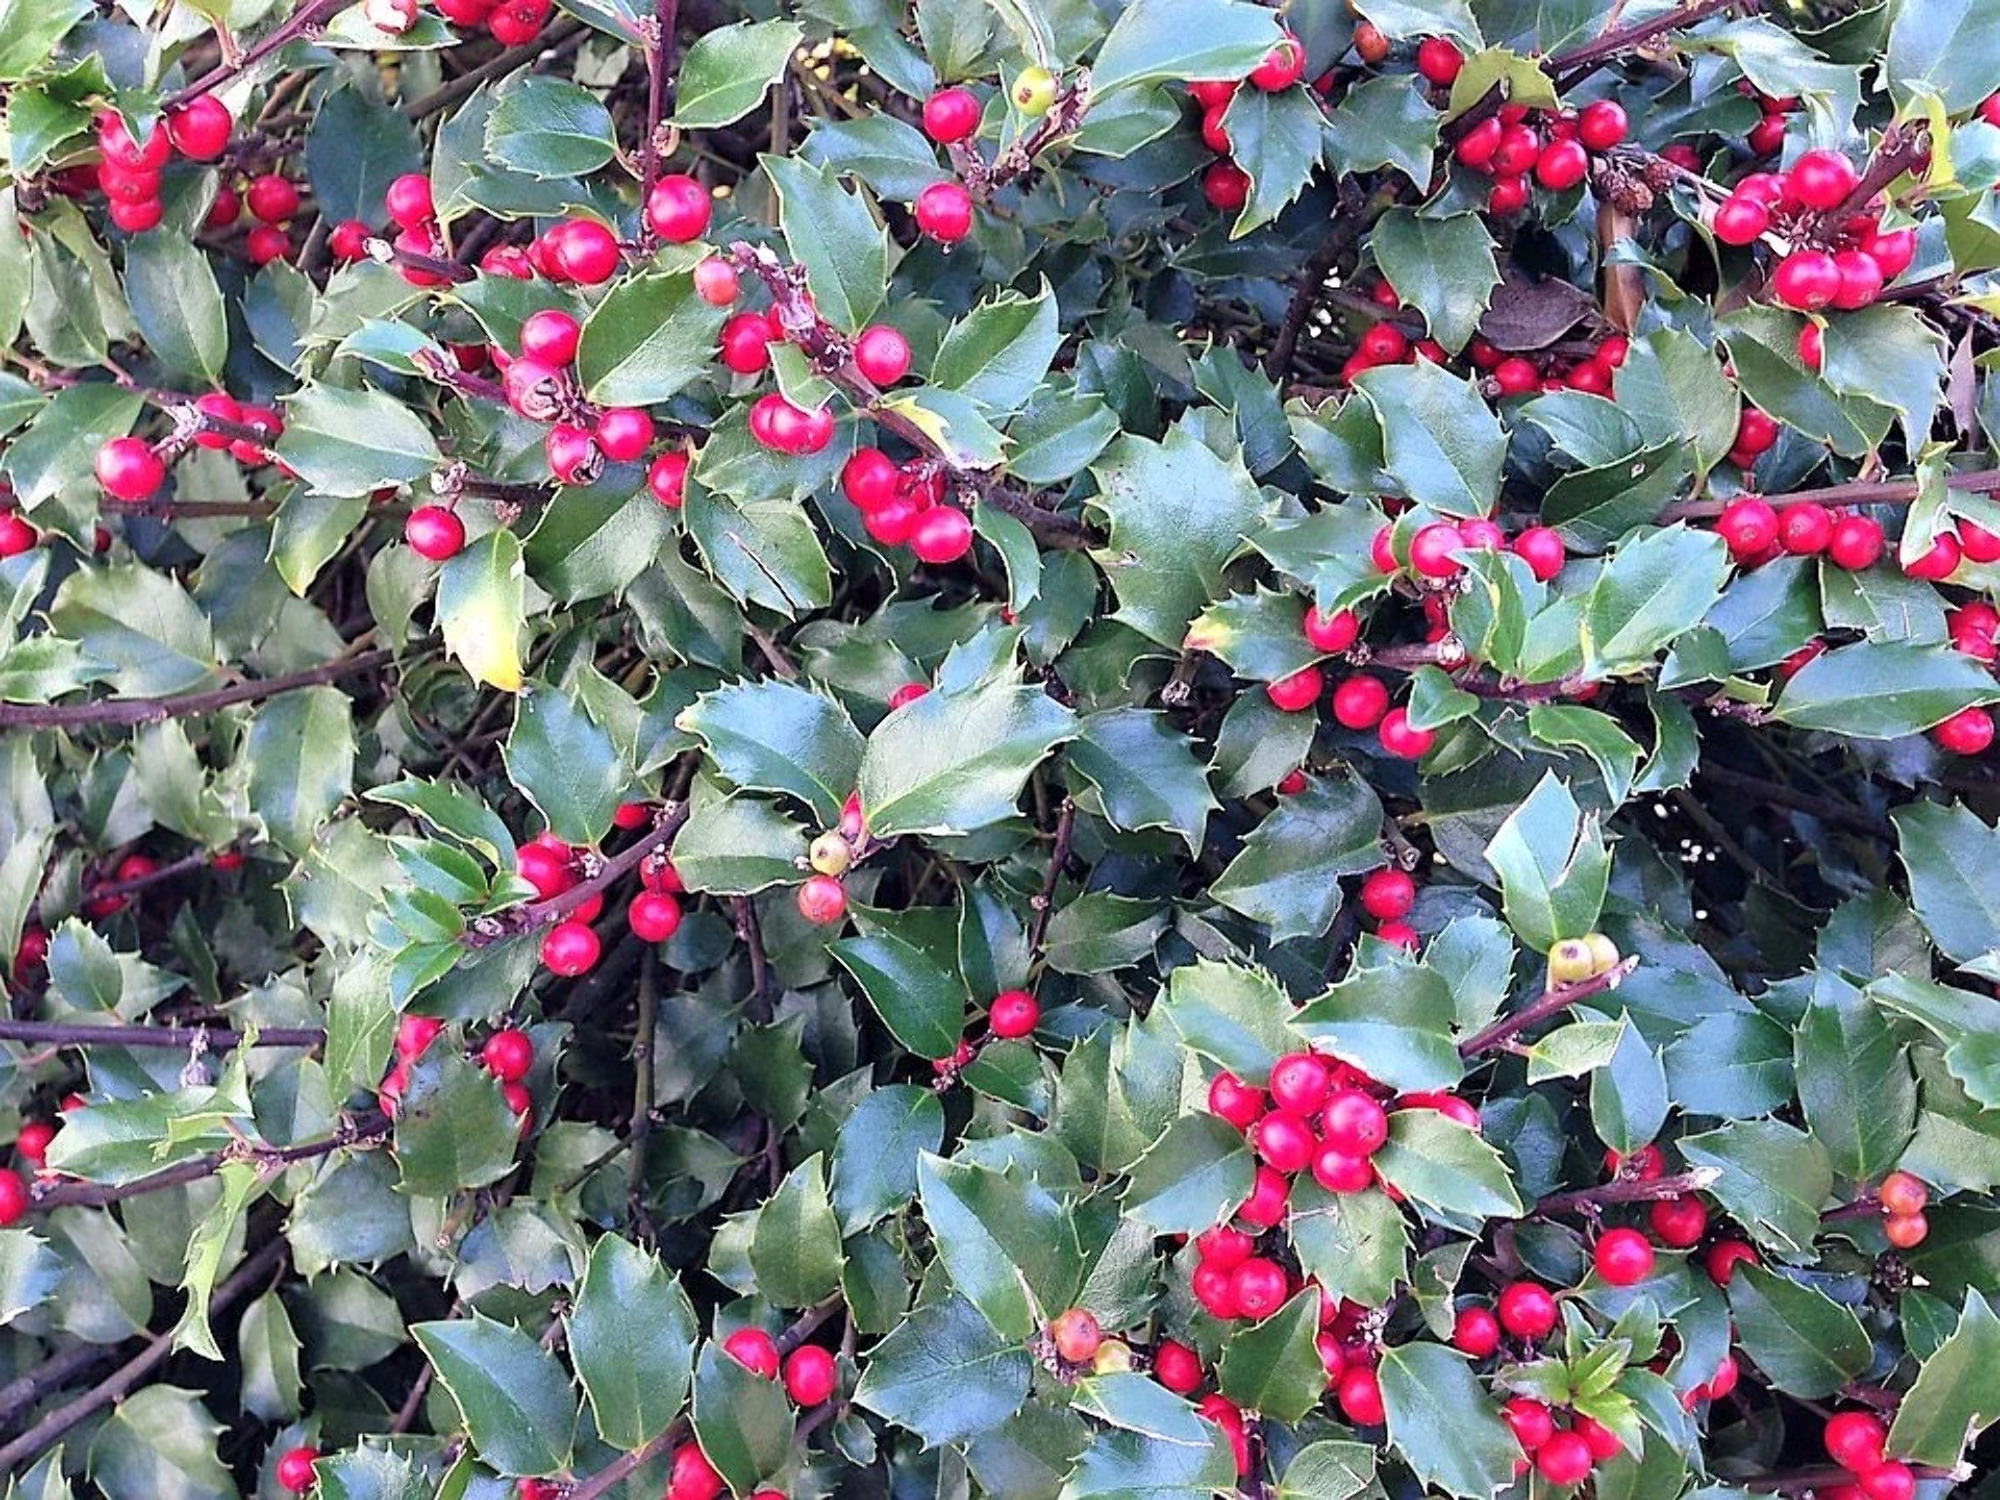 40 AMERICAN HOLLY Ilex Opaca Tree Shrub Evergreen Red Berry Seeds - aka White Holly, Prickly Holly, Christmas Holly, Yule Holly - image 1 of 11